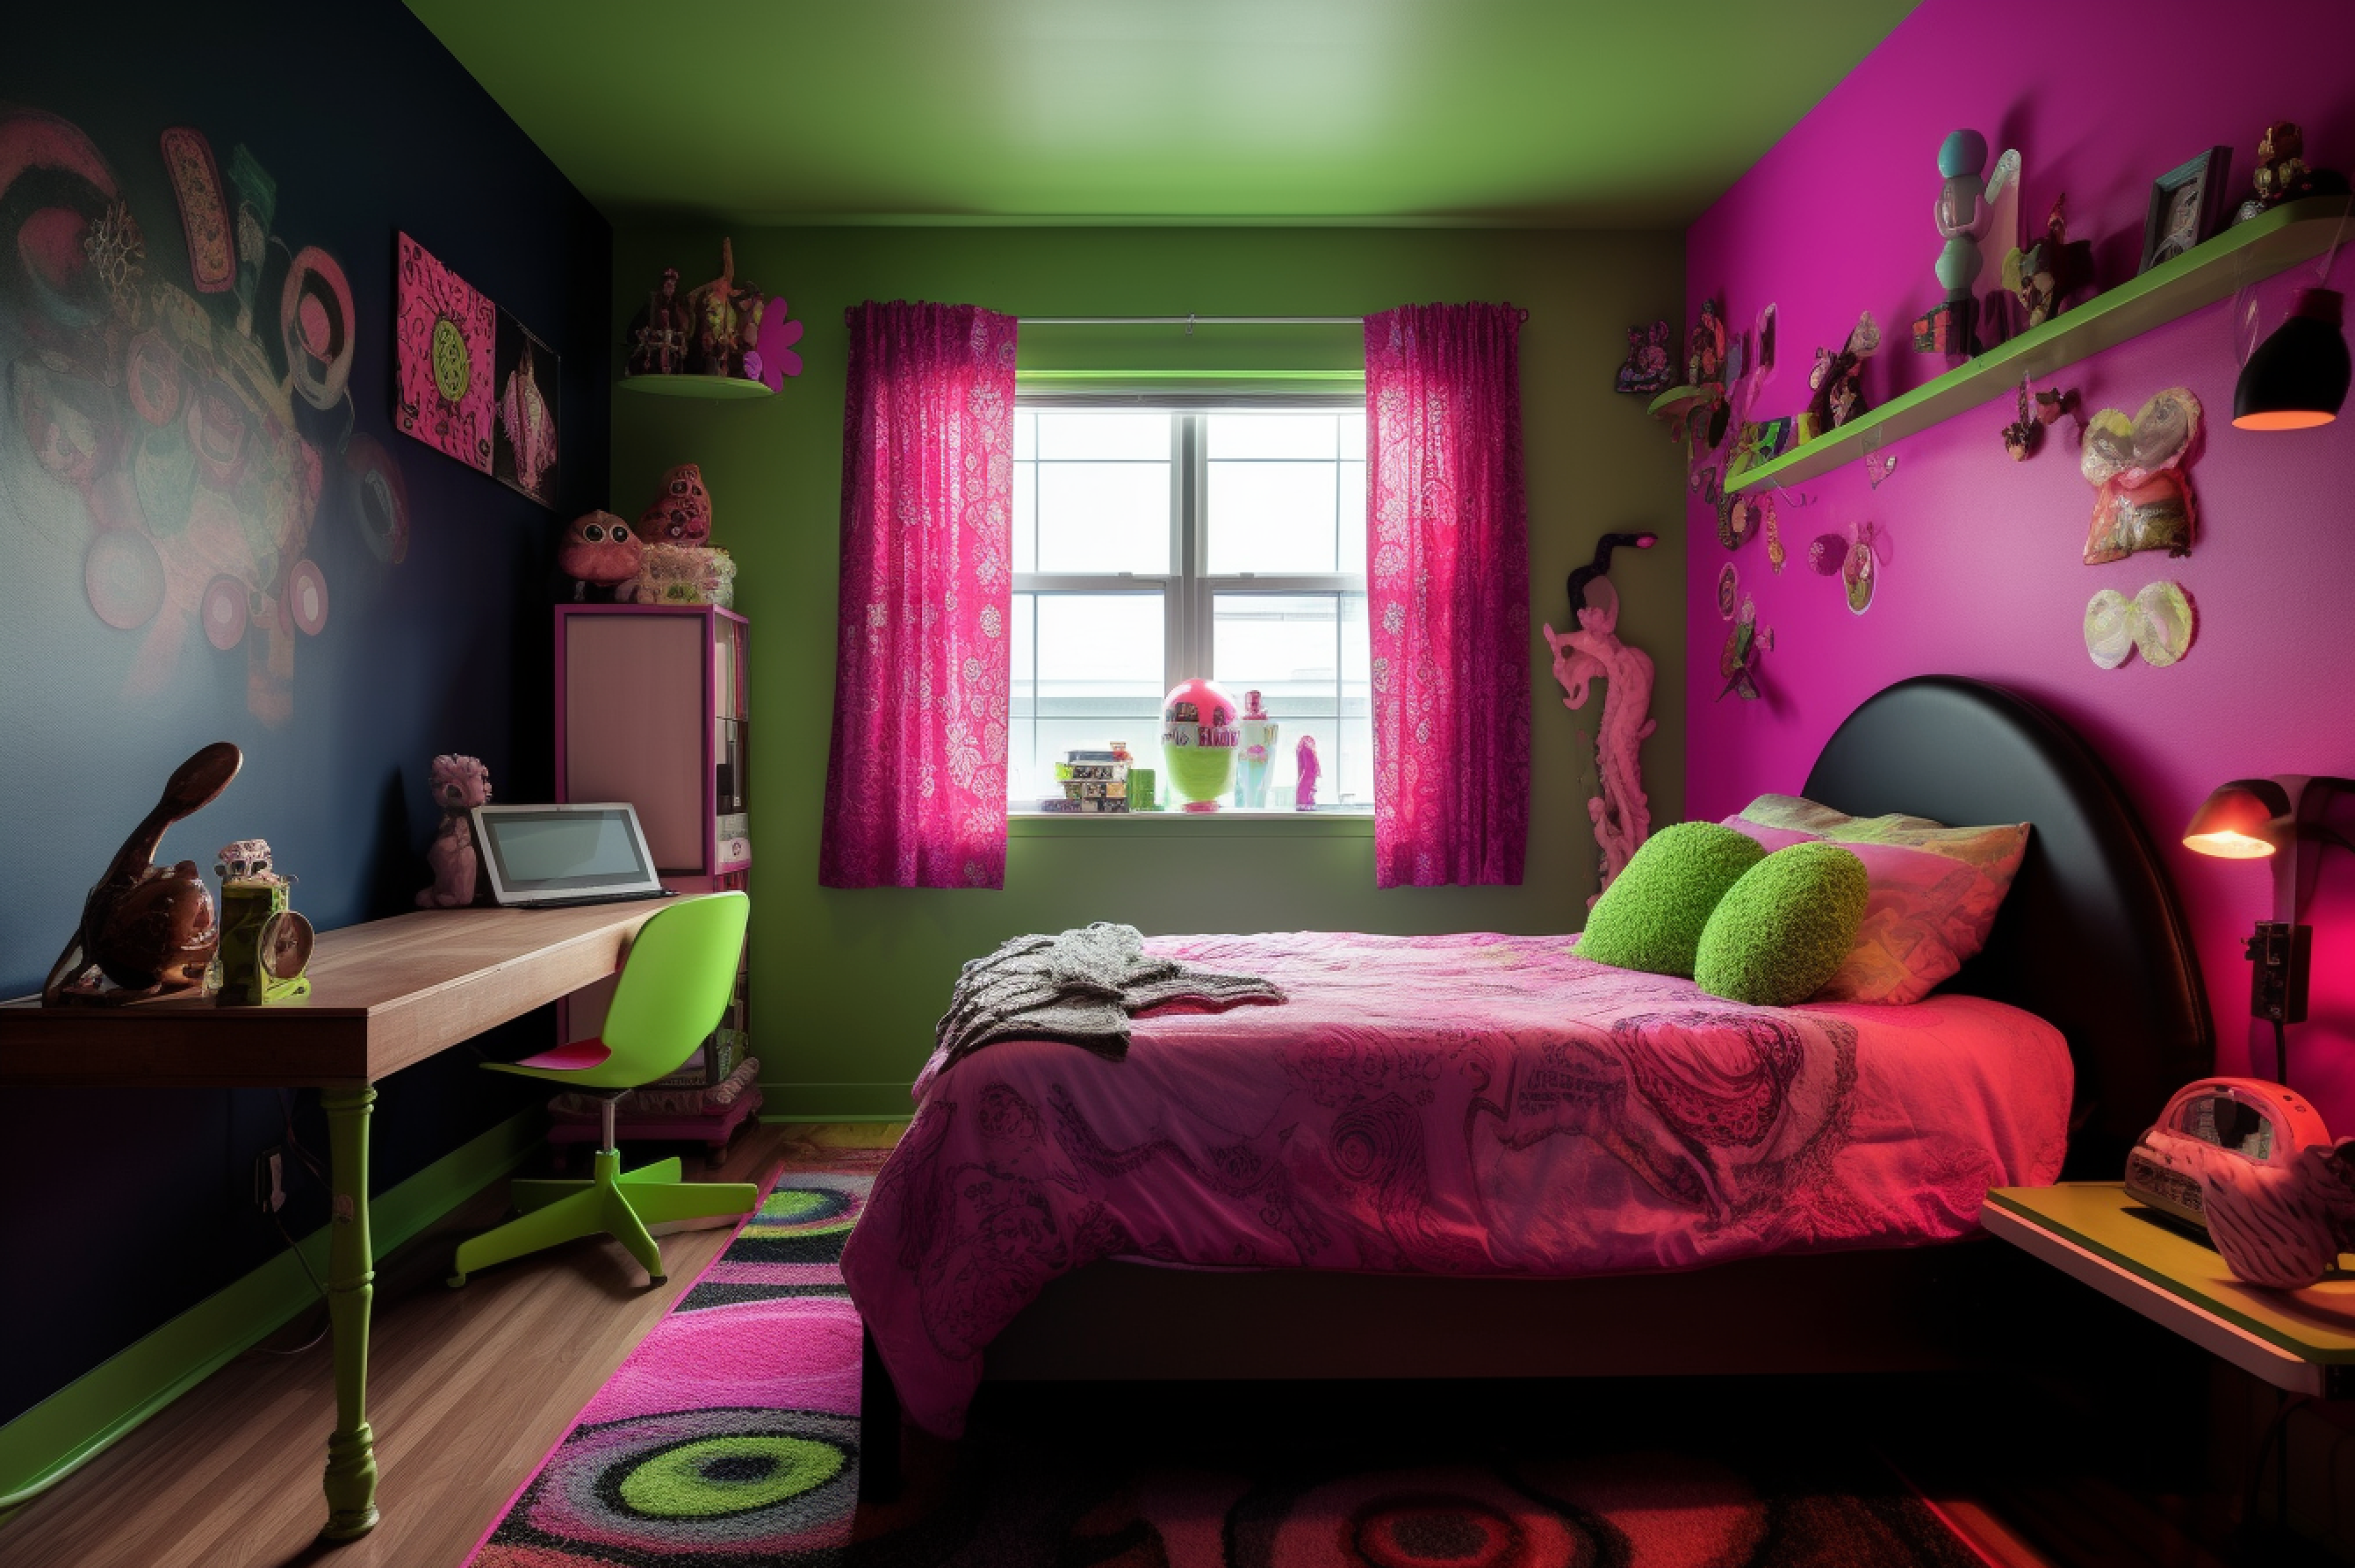 14. Pink, Purple, and Neon Green Scheme. A teen’s bedroom that screams Ready for the next TikTok dance challenge!